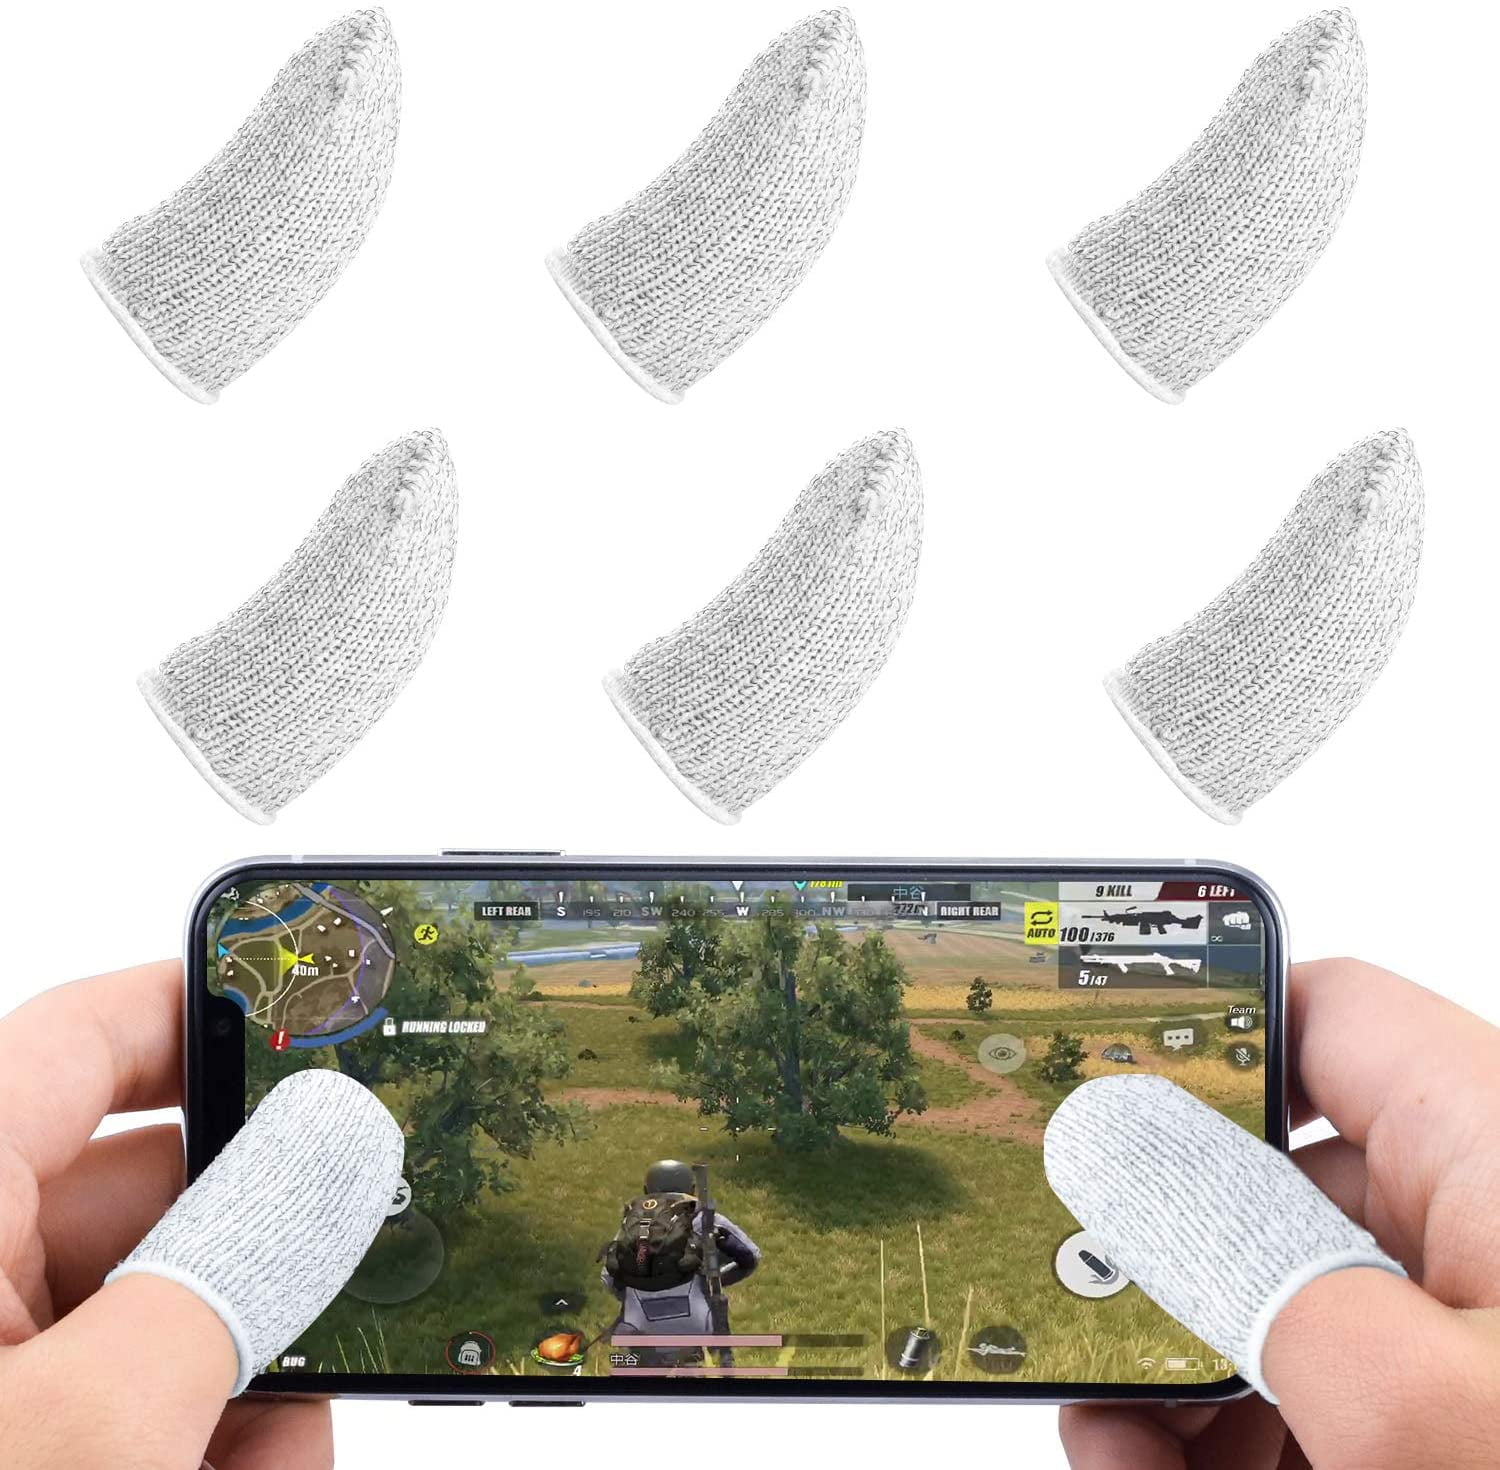 Anti-Sweat Breathable Touchscreen Sensitive Aim Joysticks Finger Set for Rules of Survival/Knives Out 20 Pack Newseego Finger Sleeve Sets for Gaming Mobile Game Controller Thumb Sleeves Red 